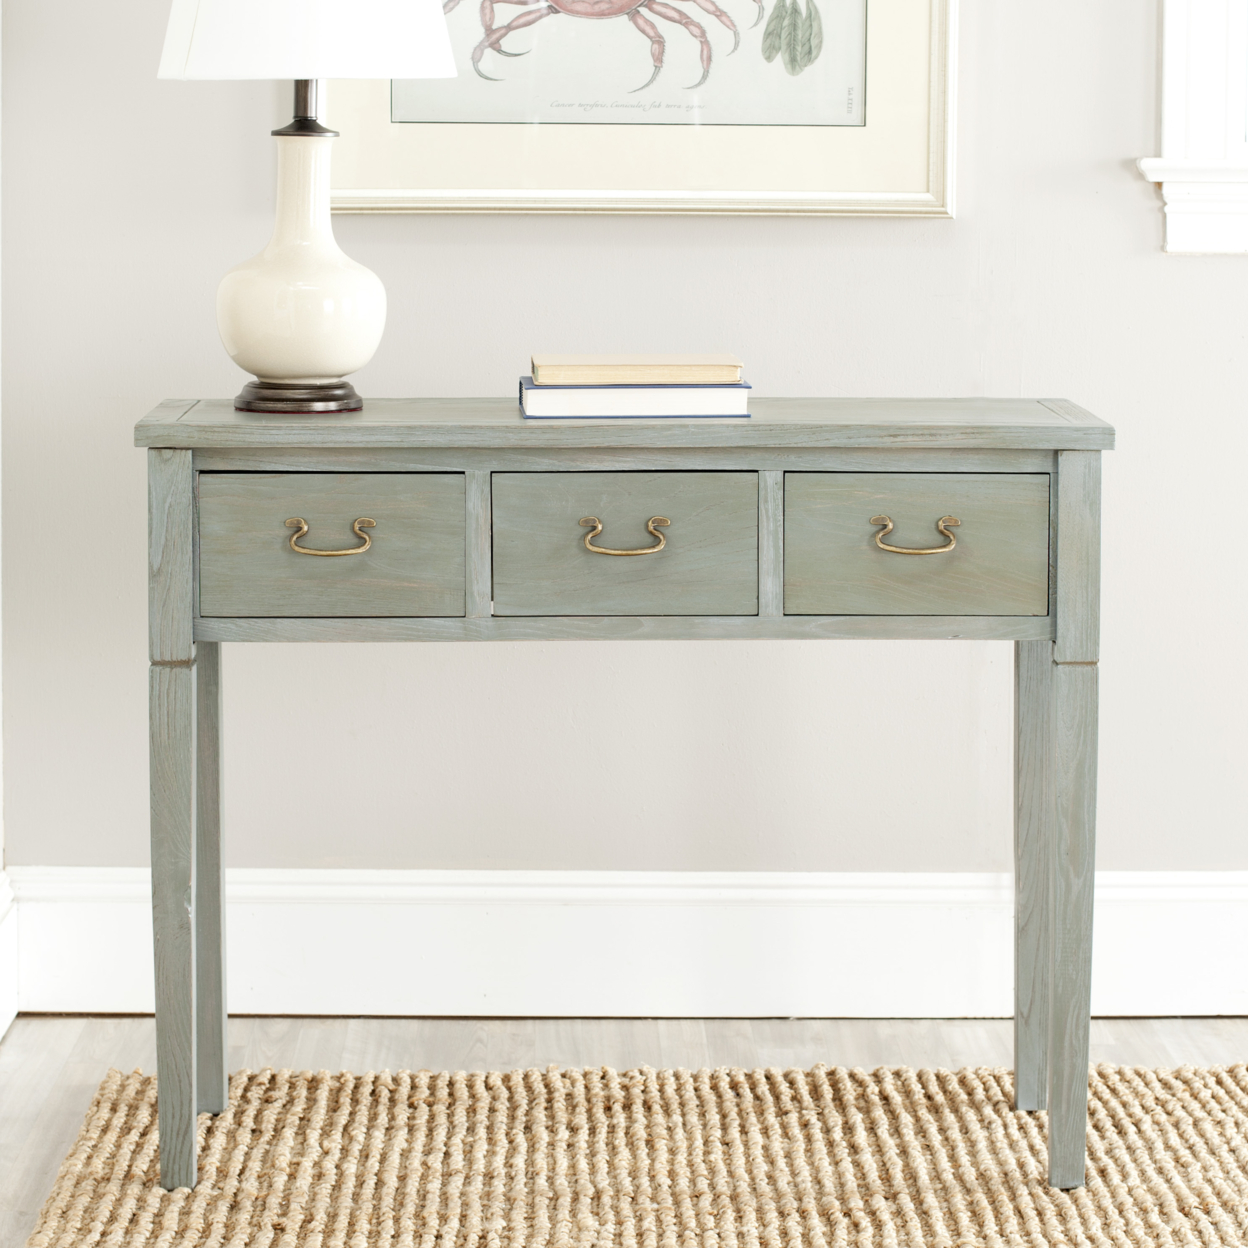 SAFAVIEH Cindy Console Table With Storage Drawers Ash Grey